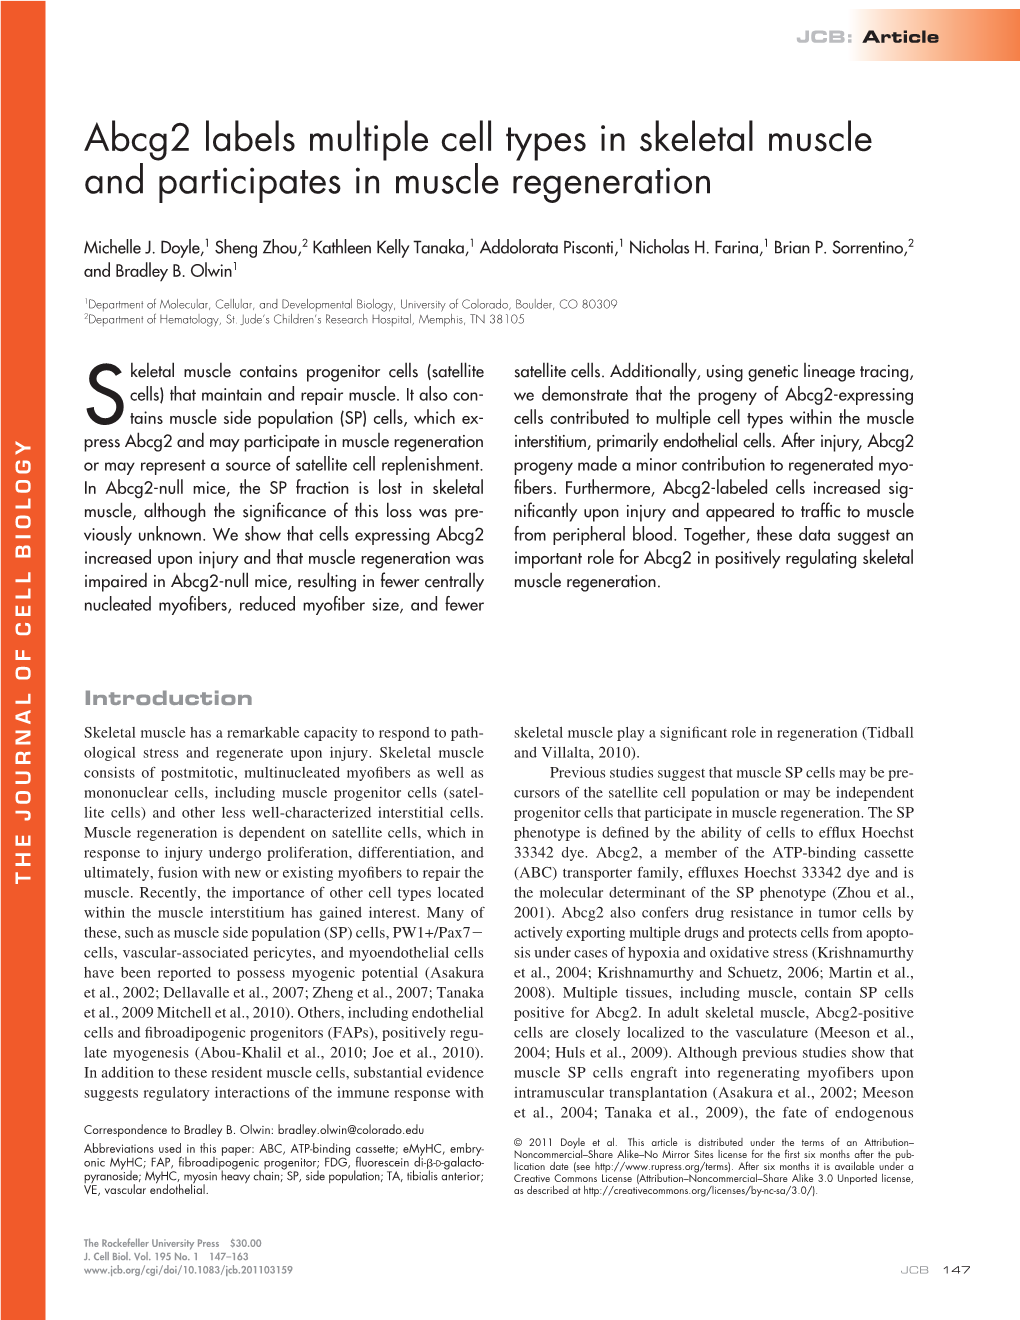 Abcg2 Labels Multiple Cell Types in Skeletal Muscle and Participates in Muscle Regeneration